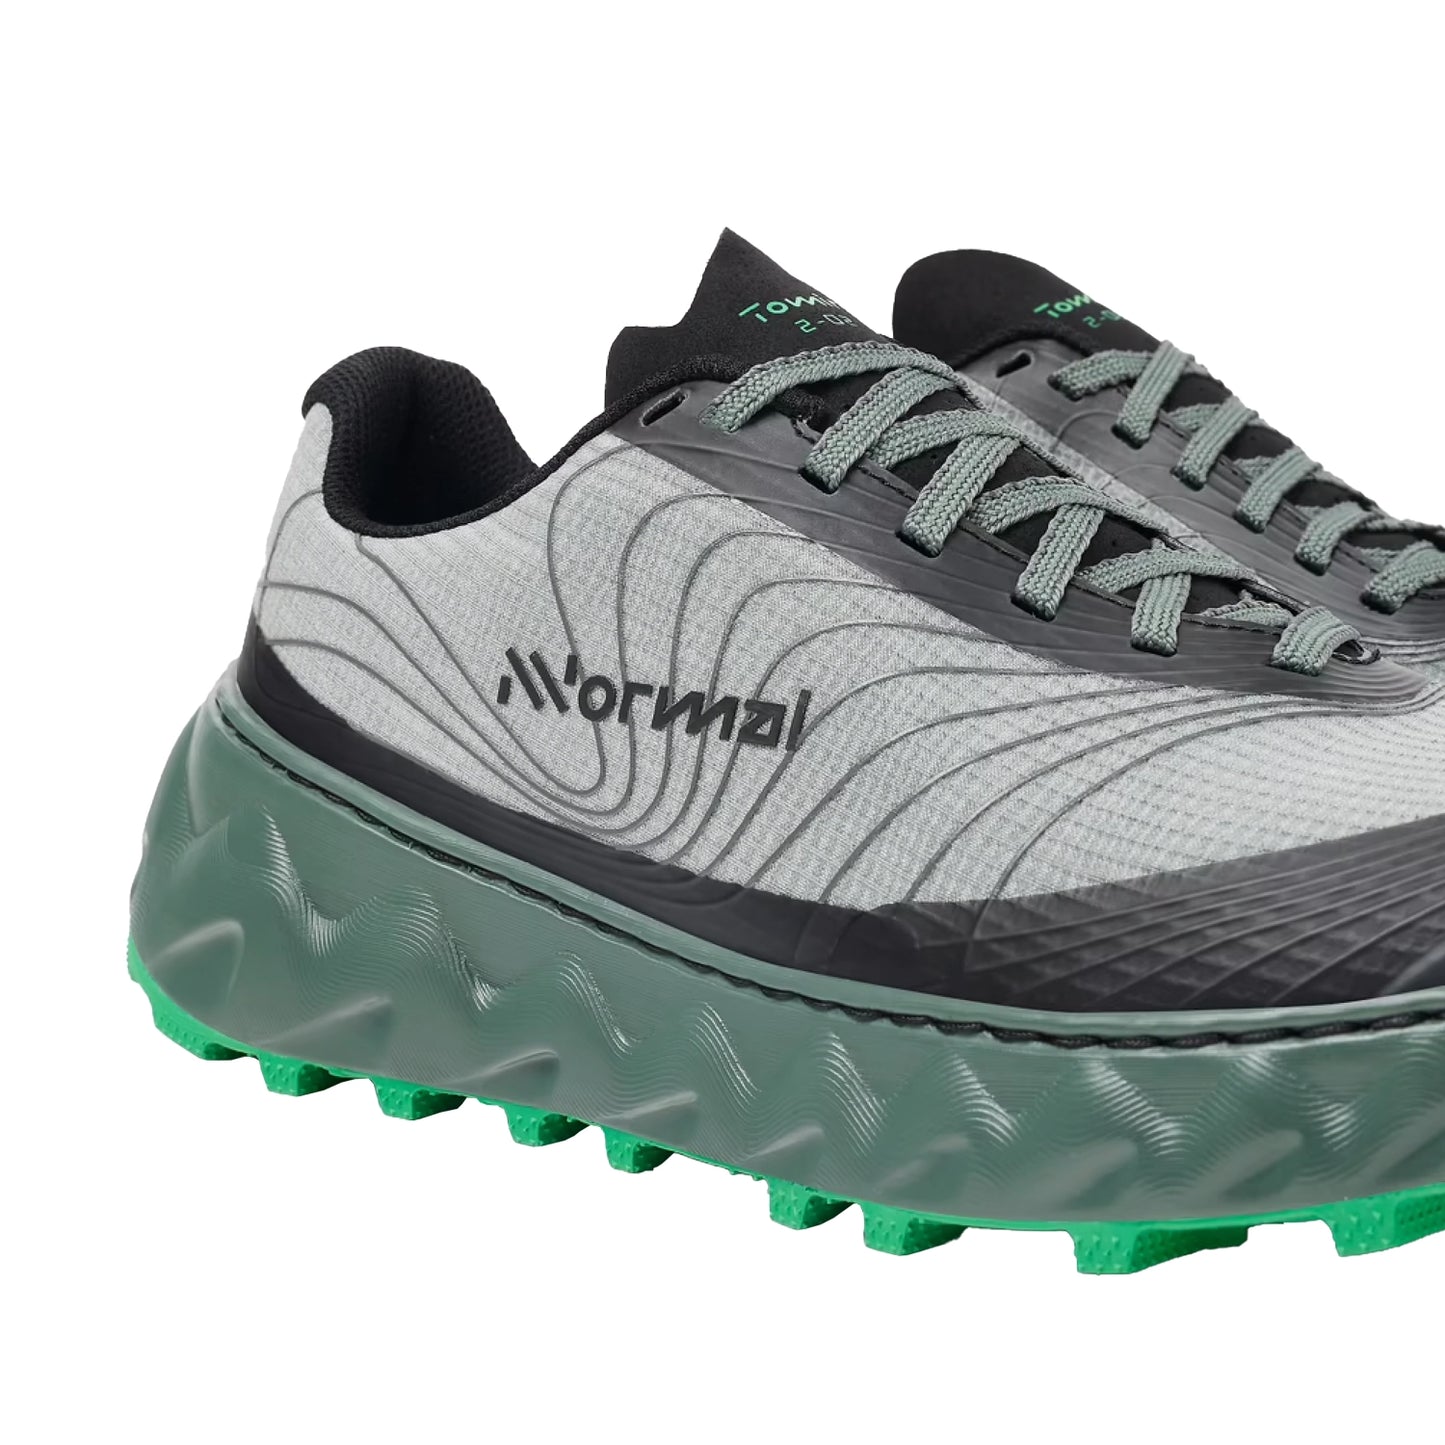 NNORMAL Tomir 2.0 Trail Shoes - Green